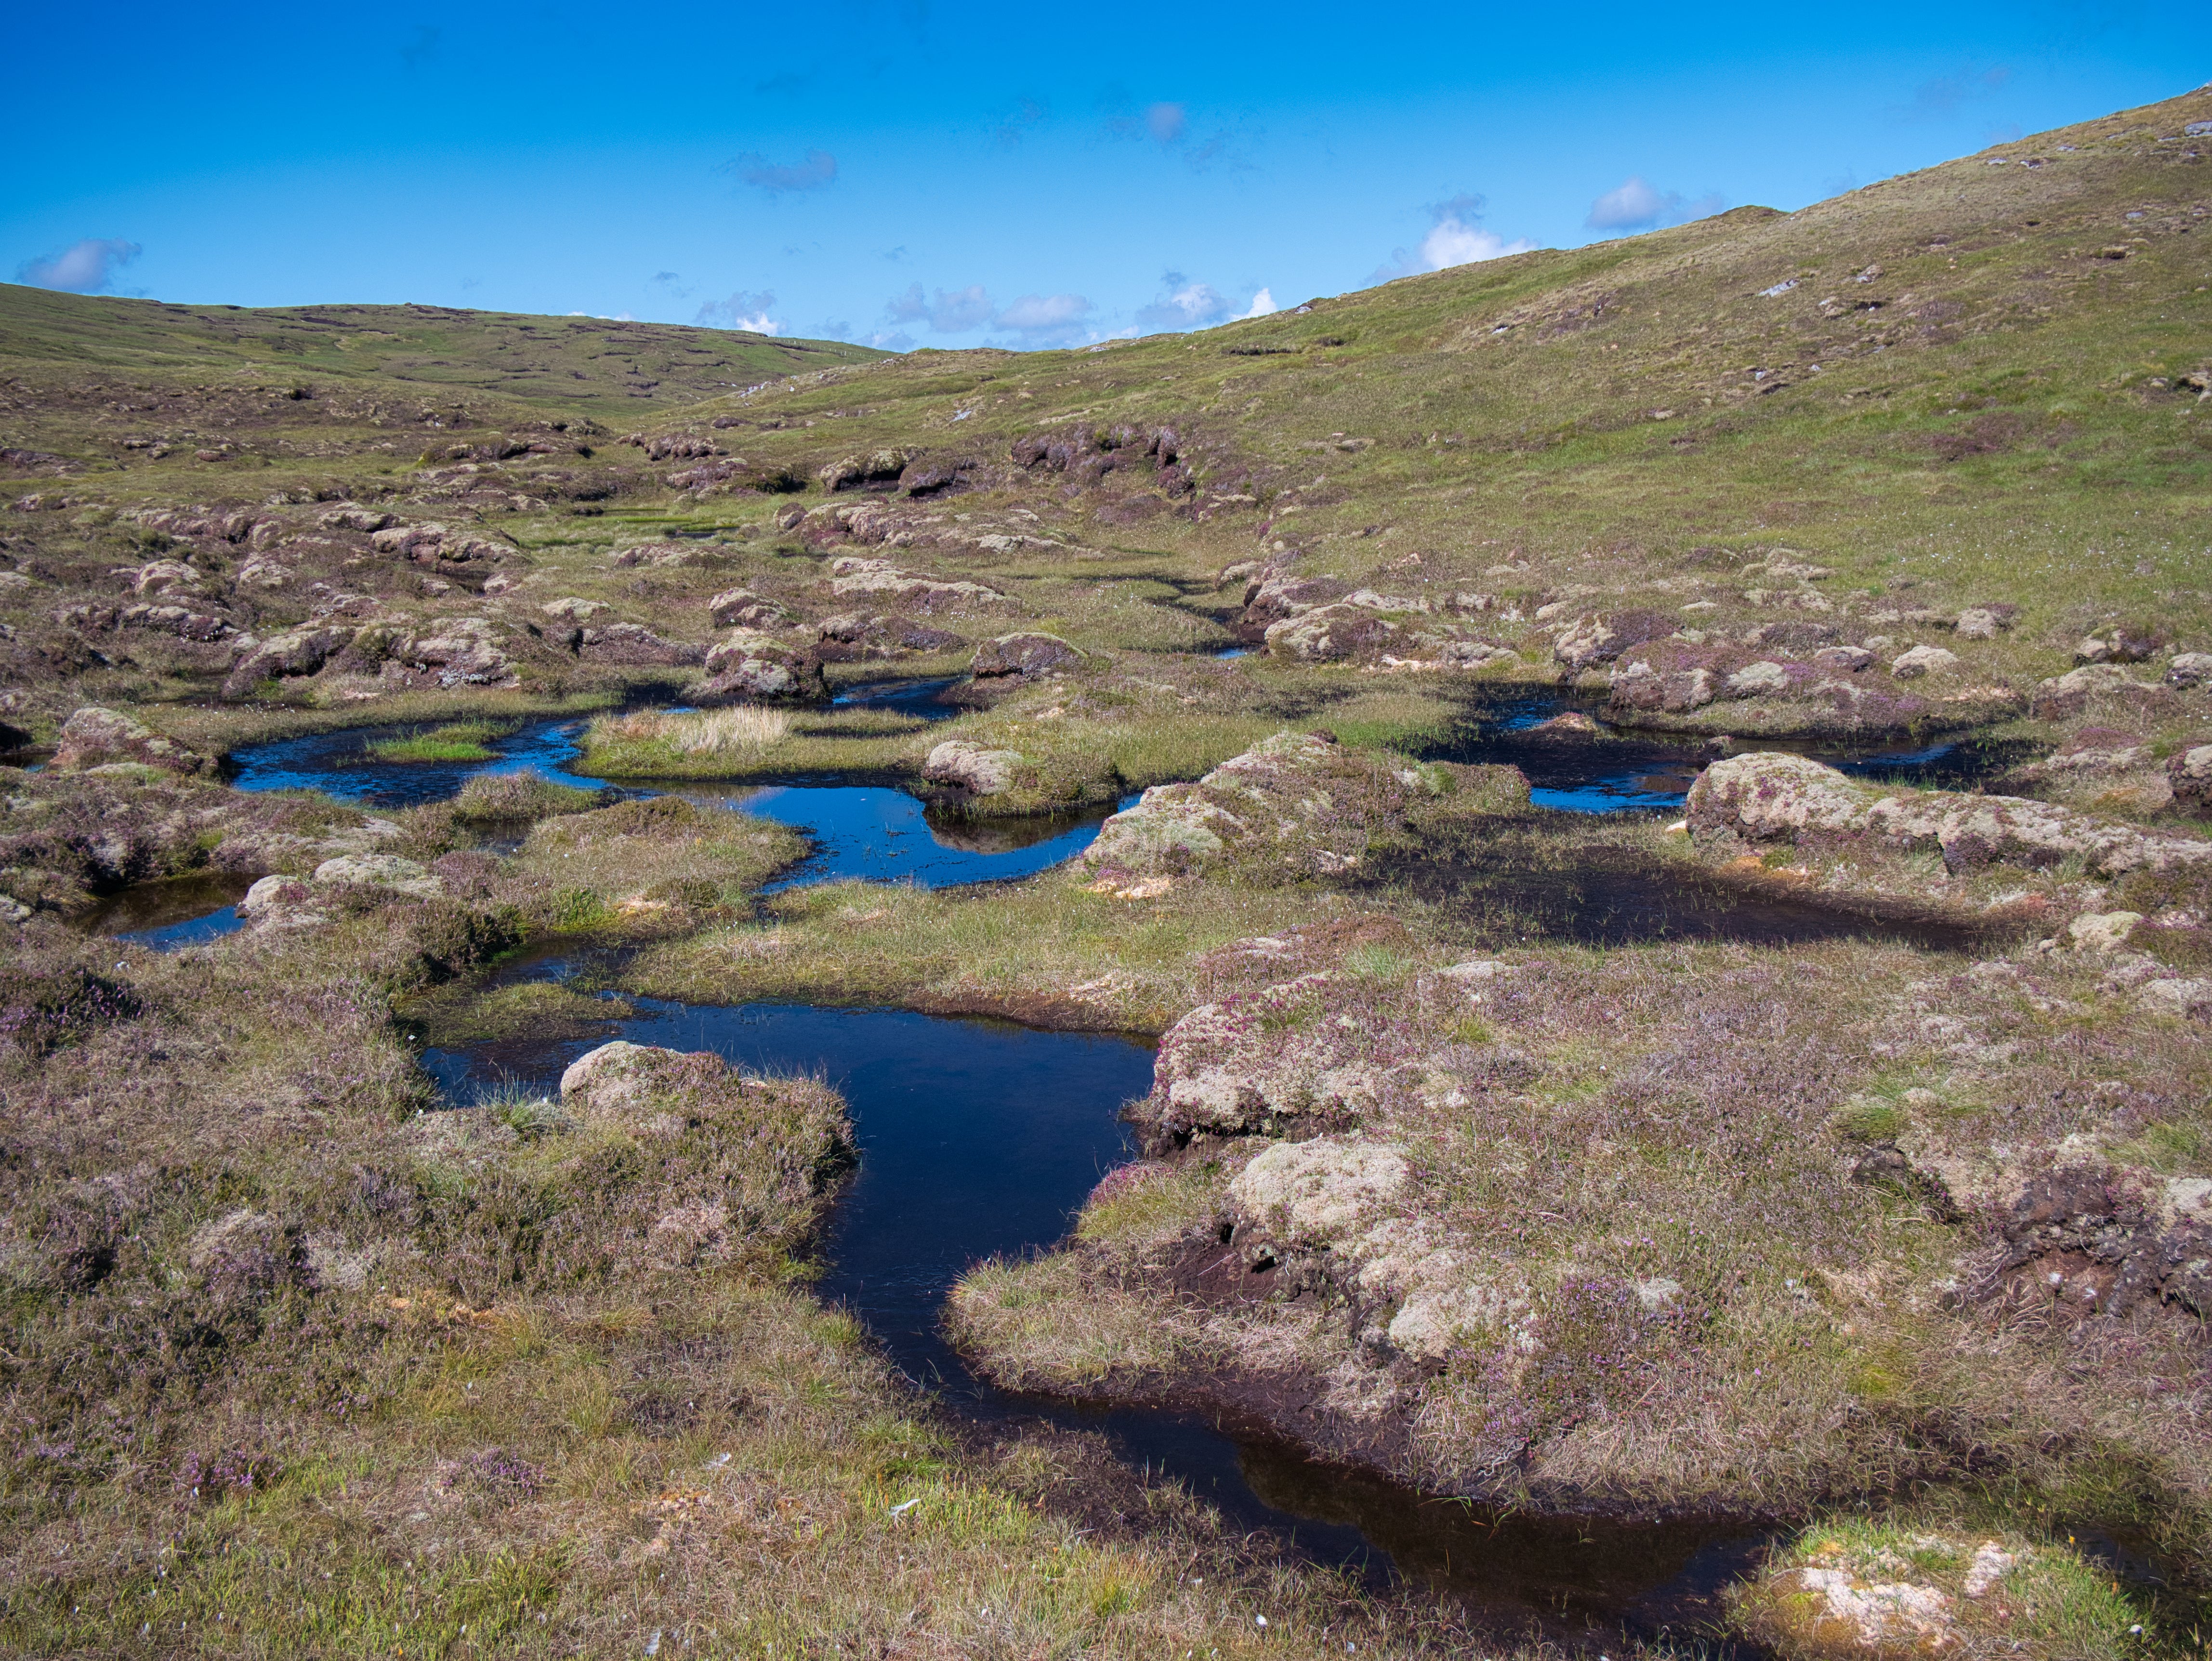 A wetland area forming peat